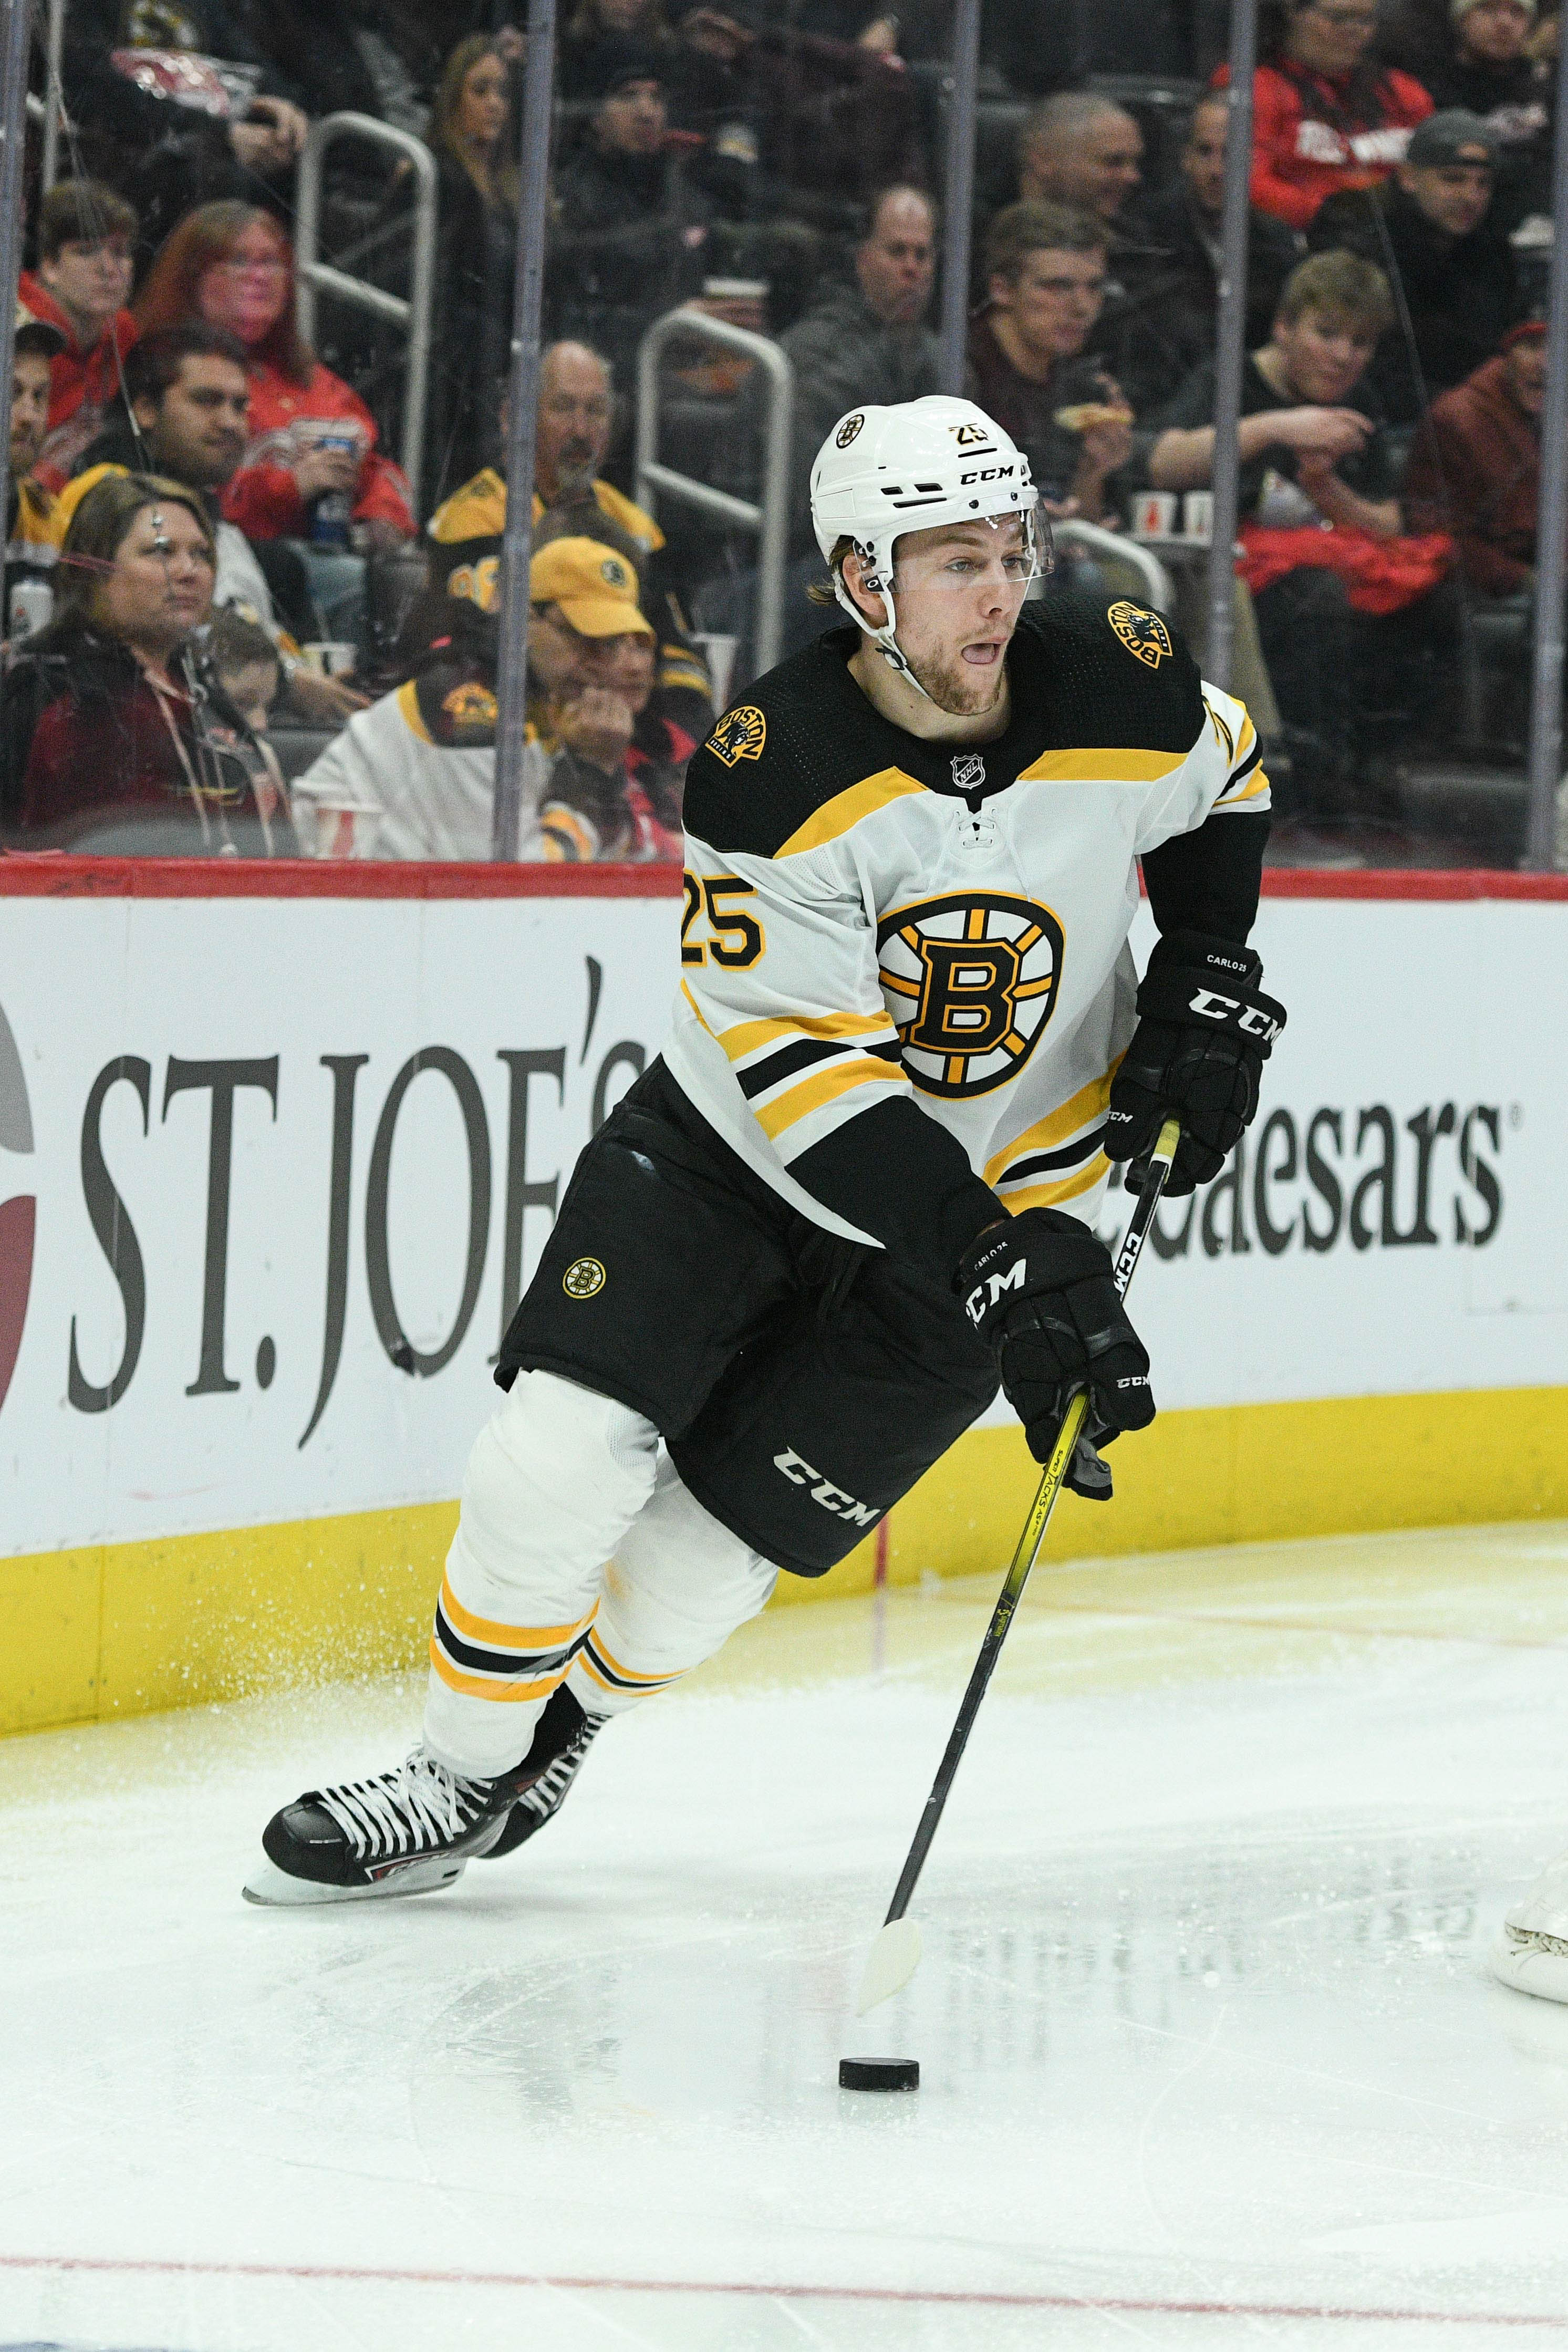 Brandon Carlo signs six-year extension with Bruins, Miller retires